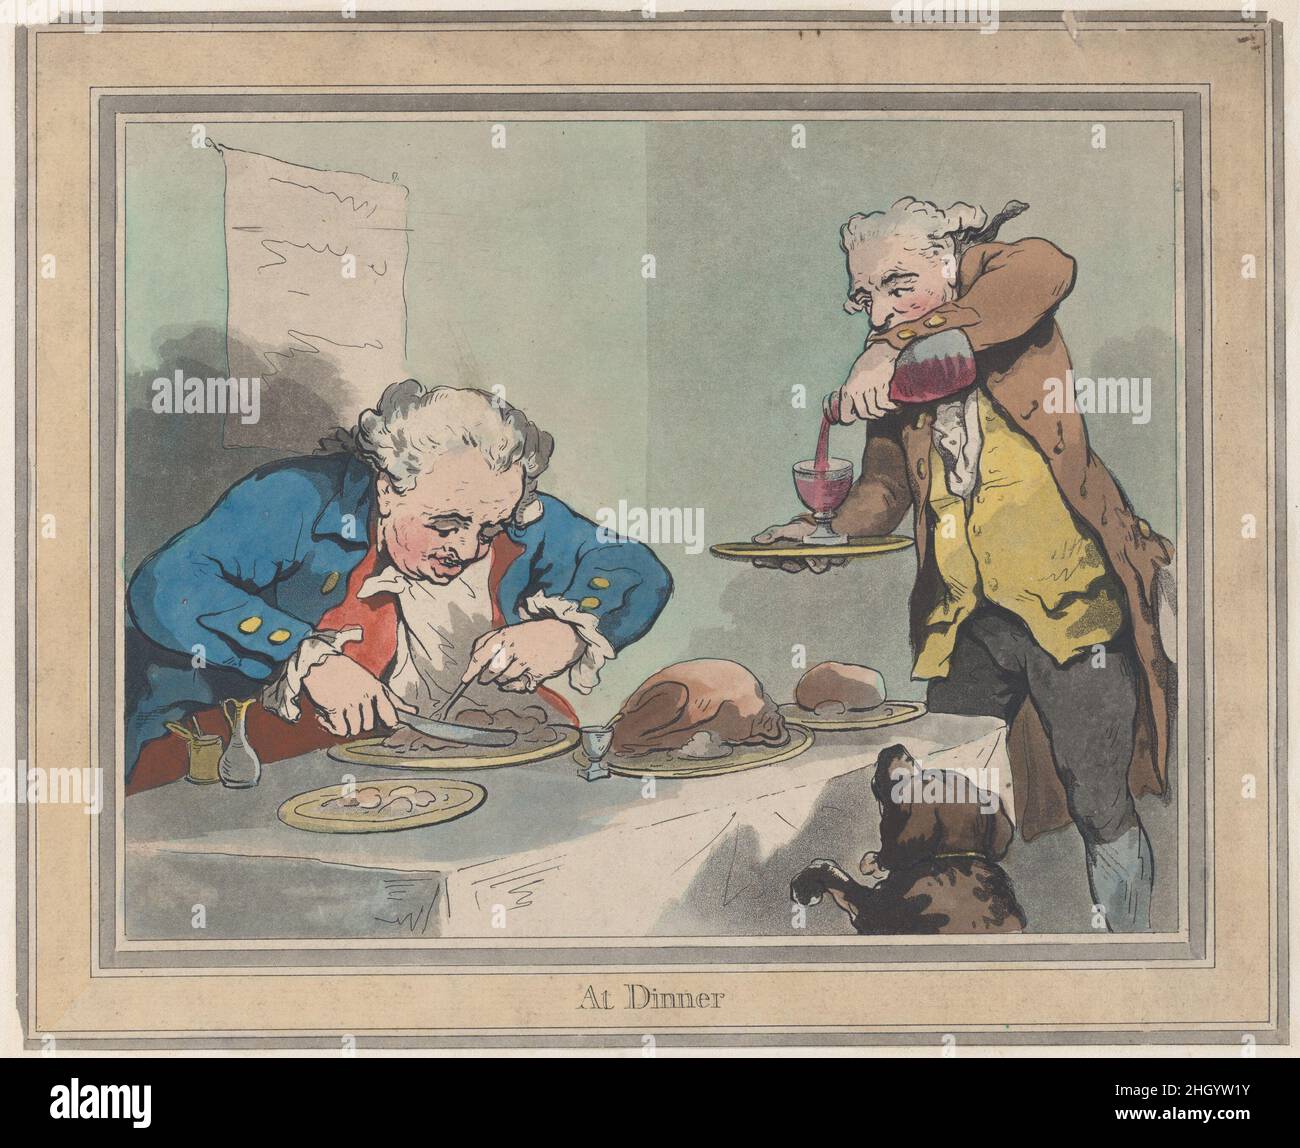 At Dinner November 5, 1792 Thomas Rowlandson. At Dinner. Different Sensations, No. 3. Thomas Rowlandson (British, London 1757–1827 London). November 5, 1792. Hand-colored etching and aquatint. S. W. Fores (London). Prints Stock Photo